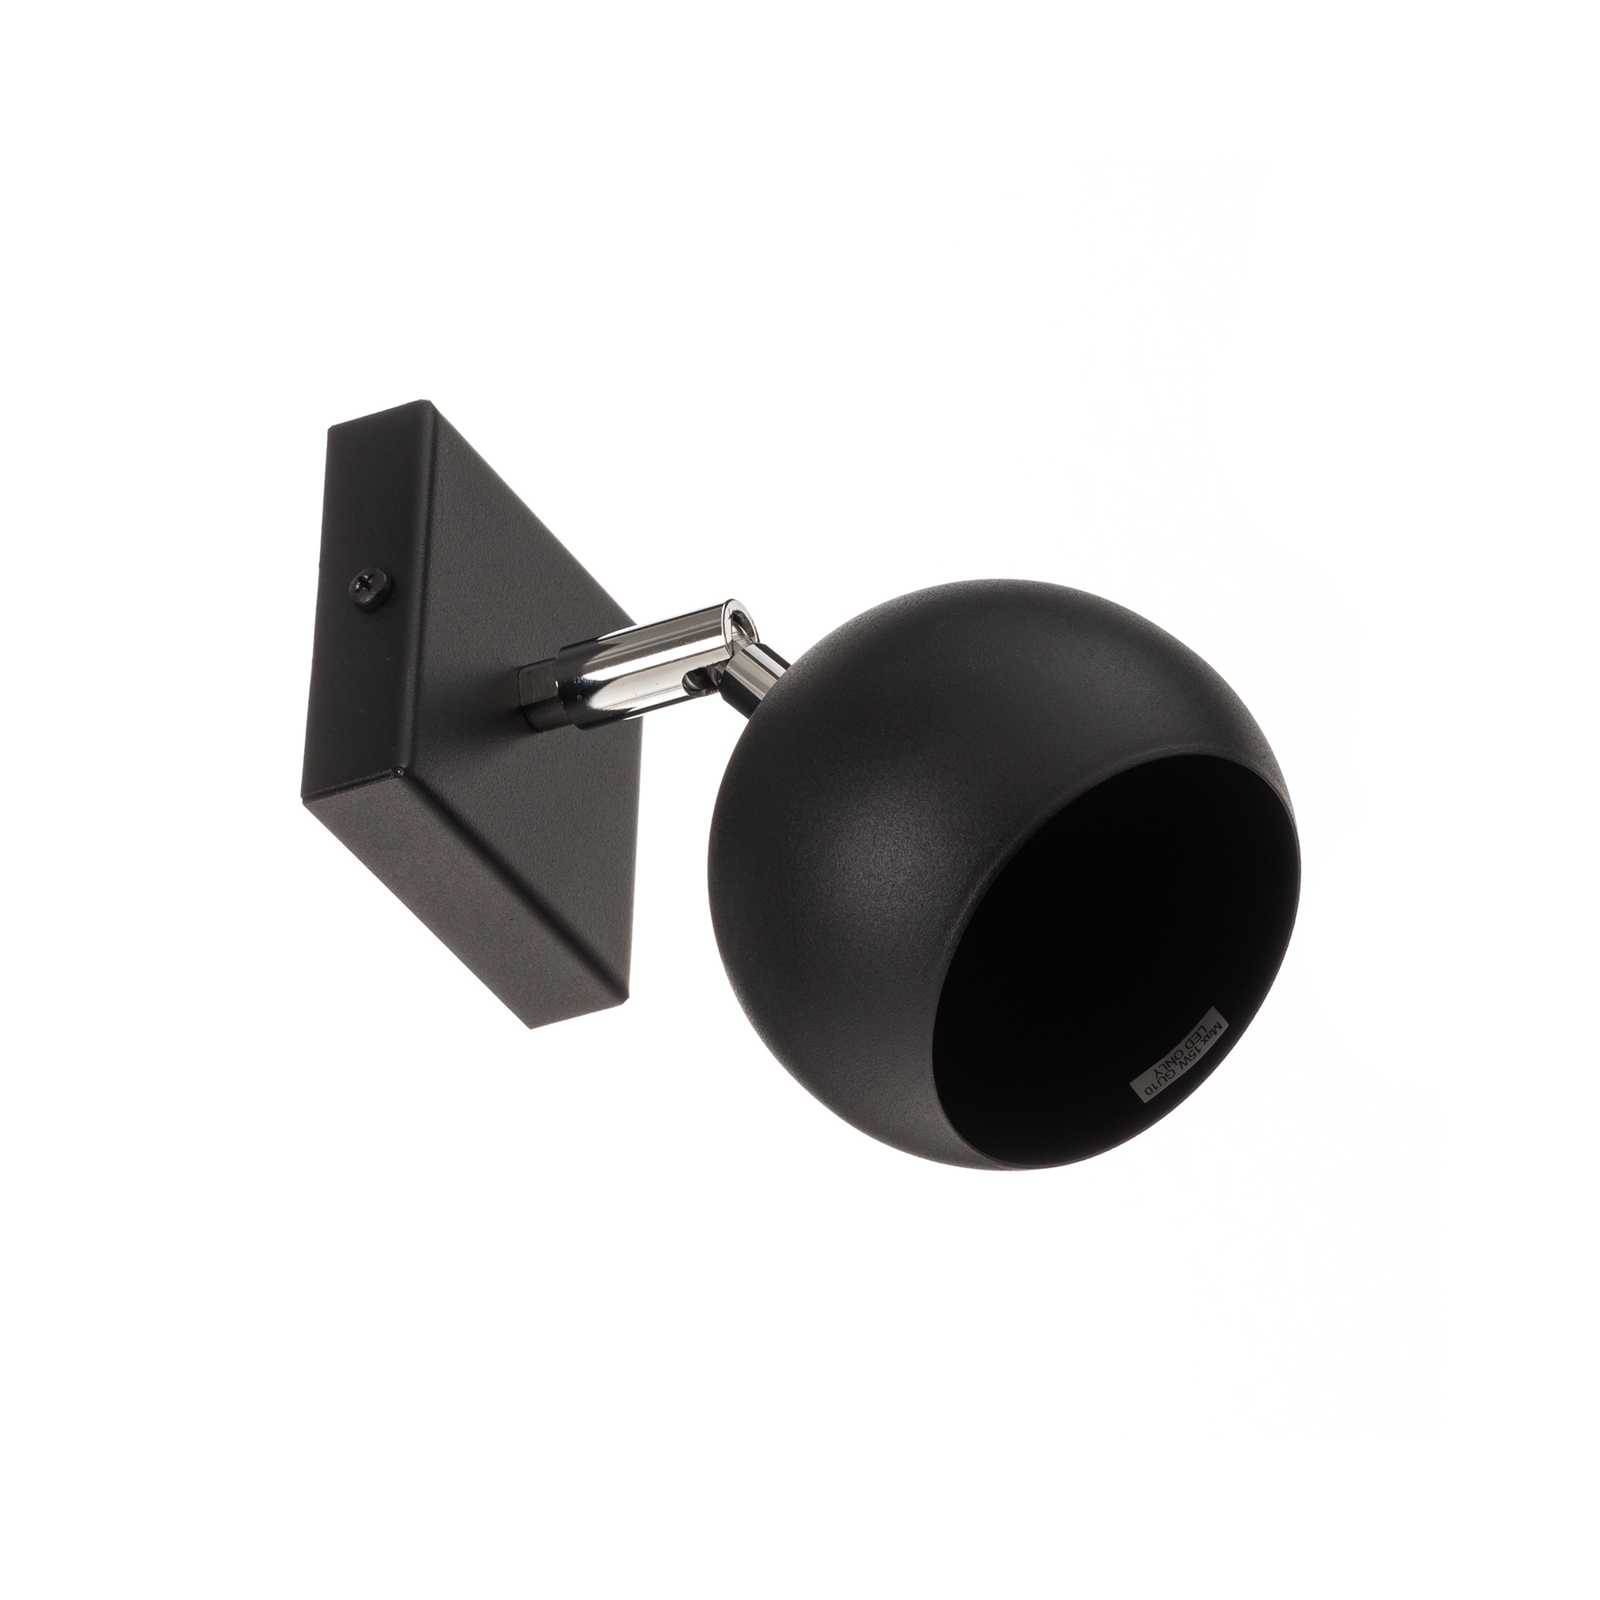 Flame wall spotlight made of steel, black